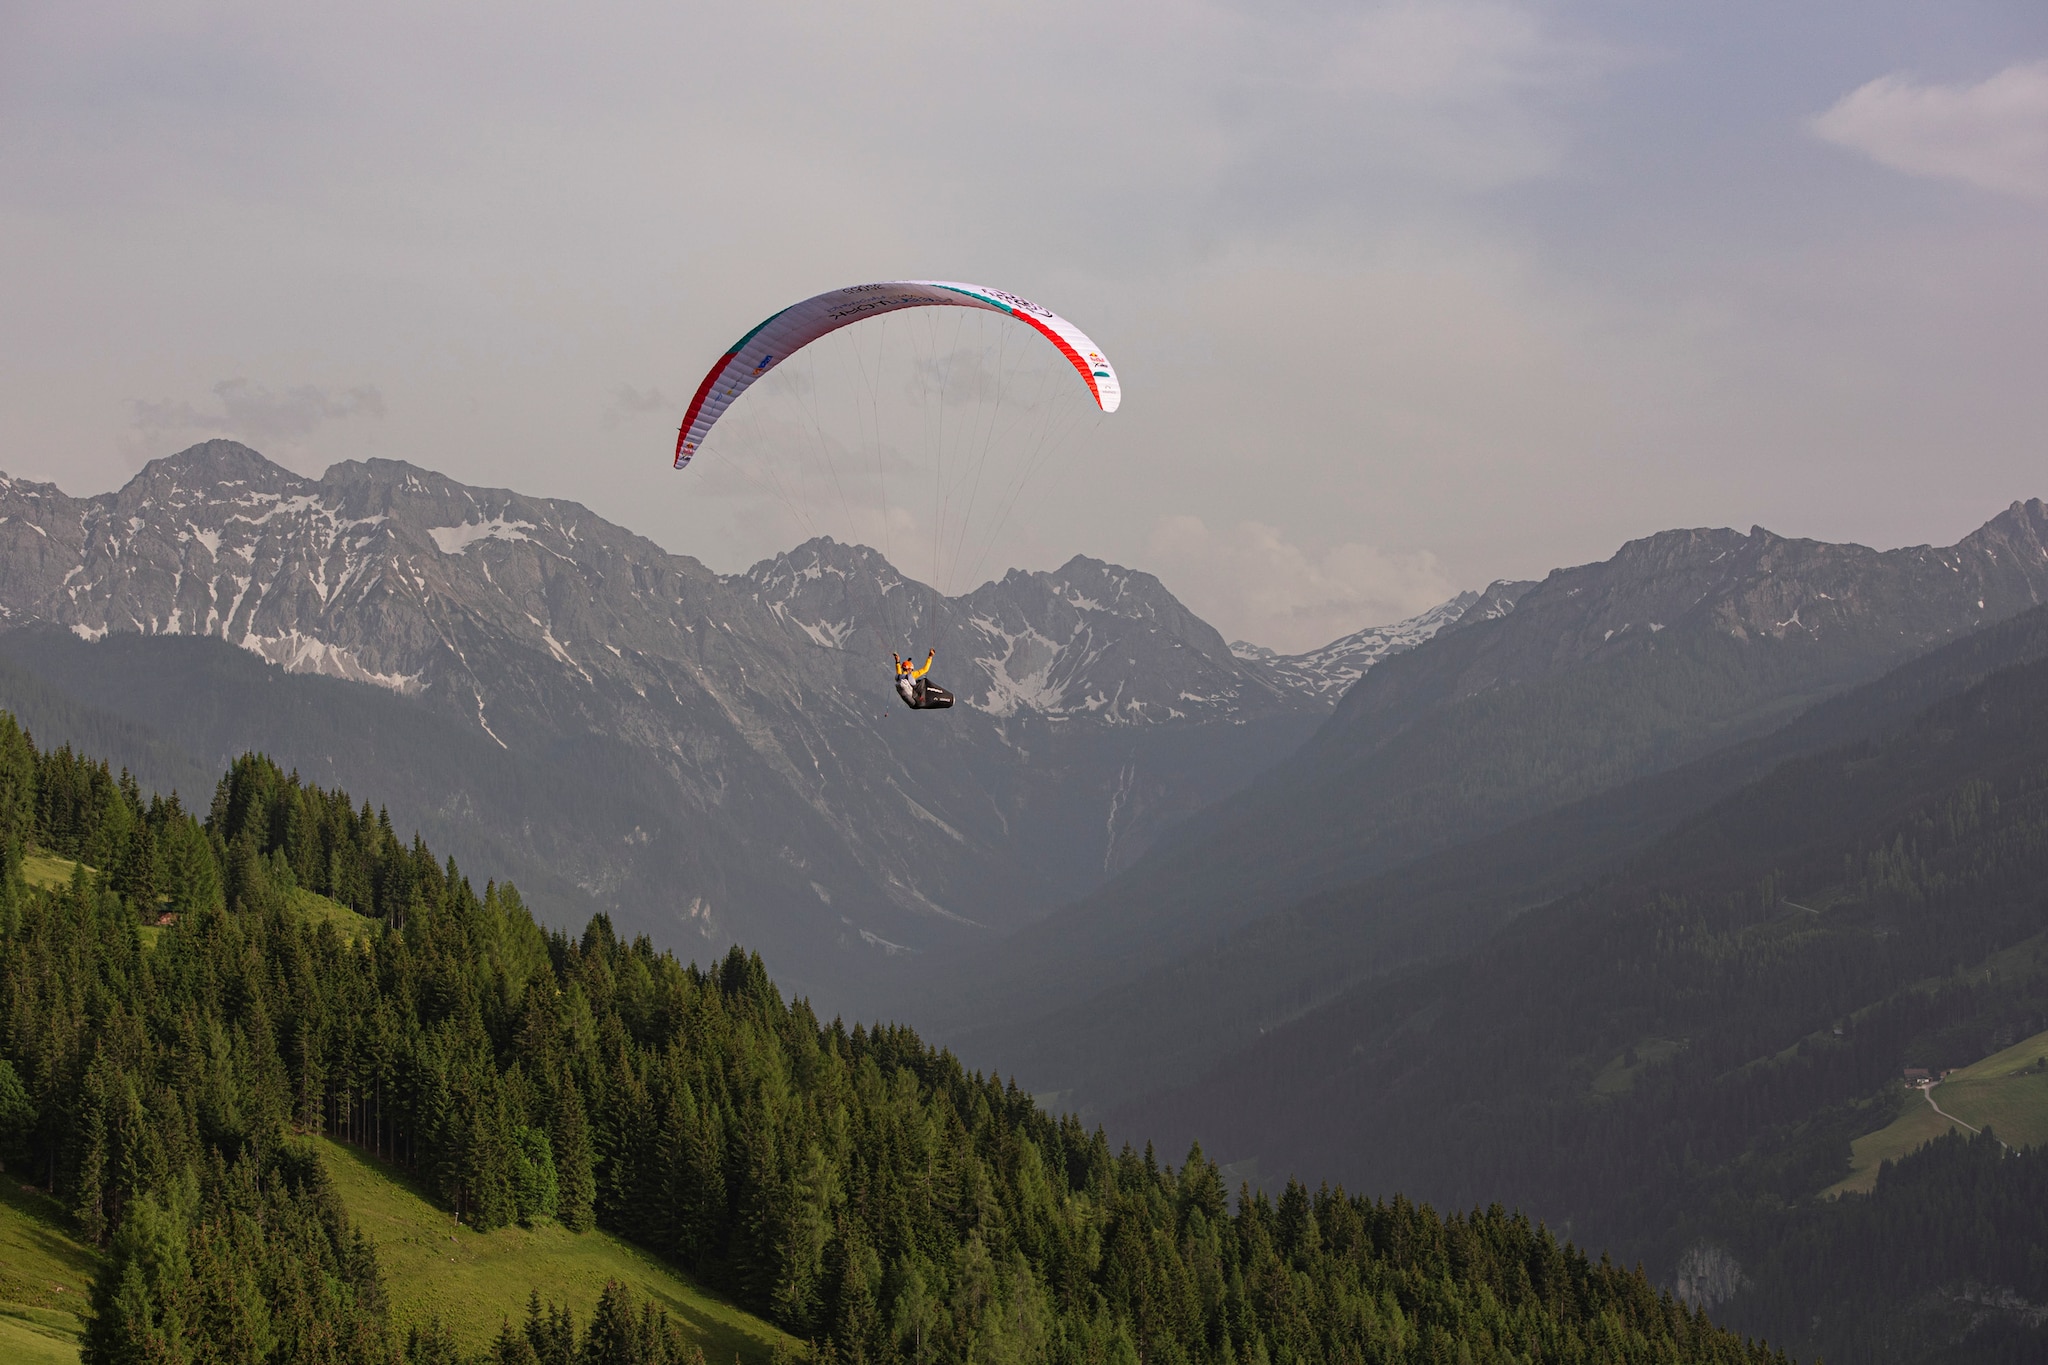 Chrigl Maurer (SUI1) races towards turnpoint Kleinarl-Wagrain prior to the Red Bull X-Alps in Salzburg on June 20, 2021.